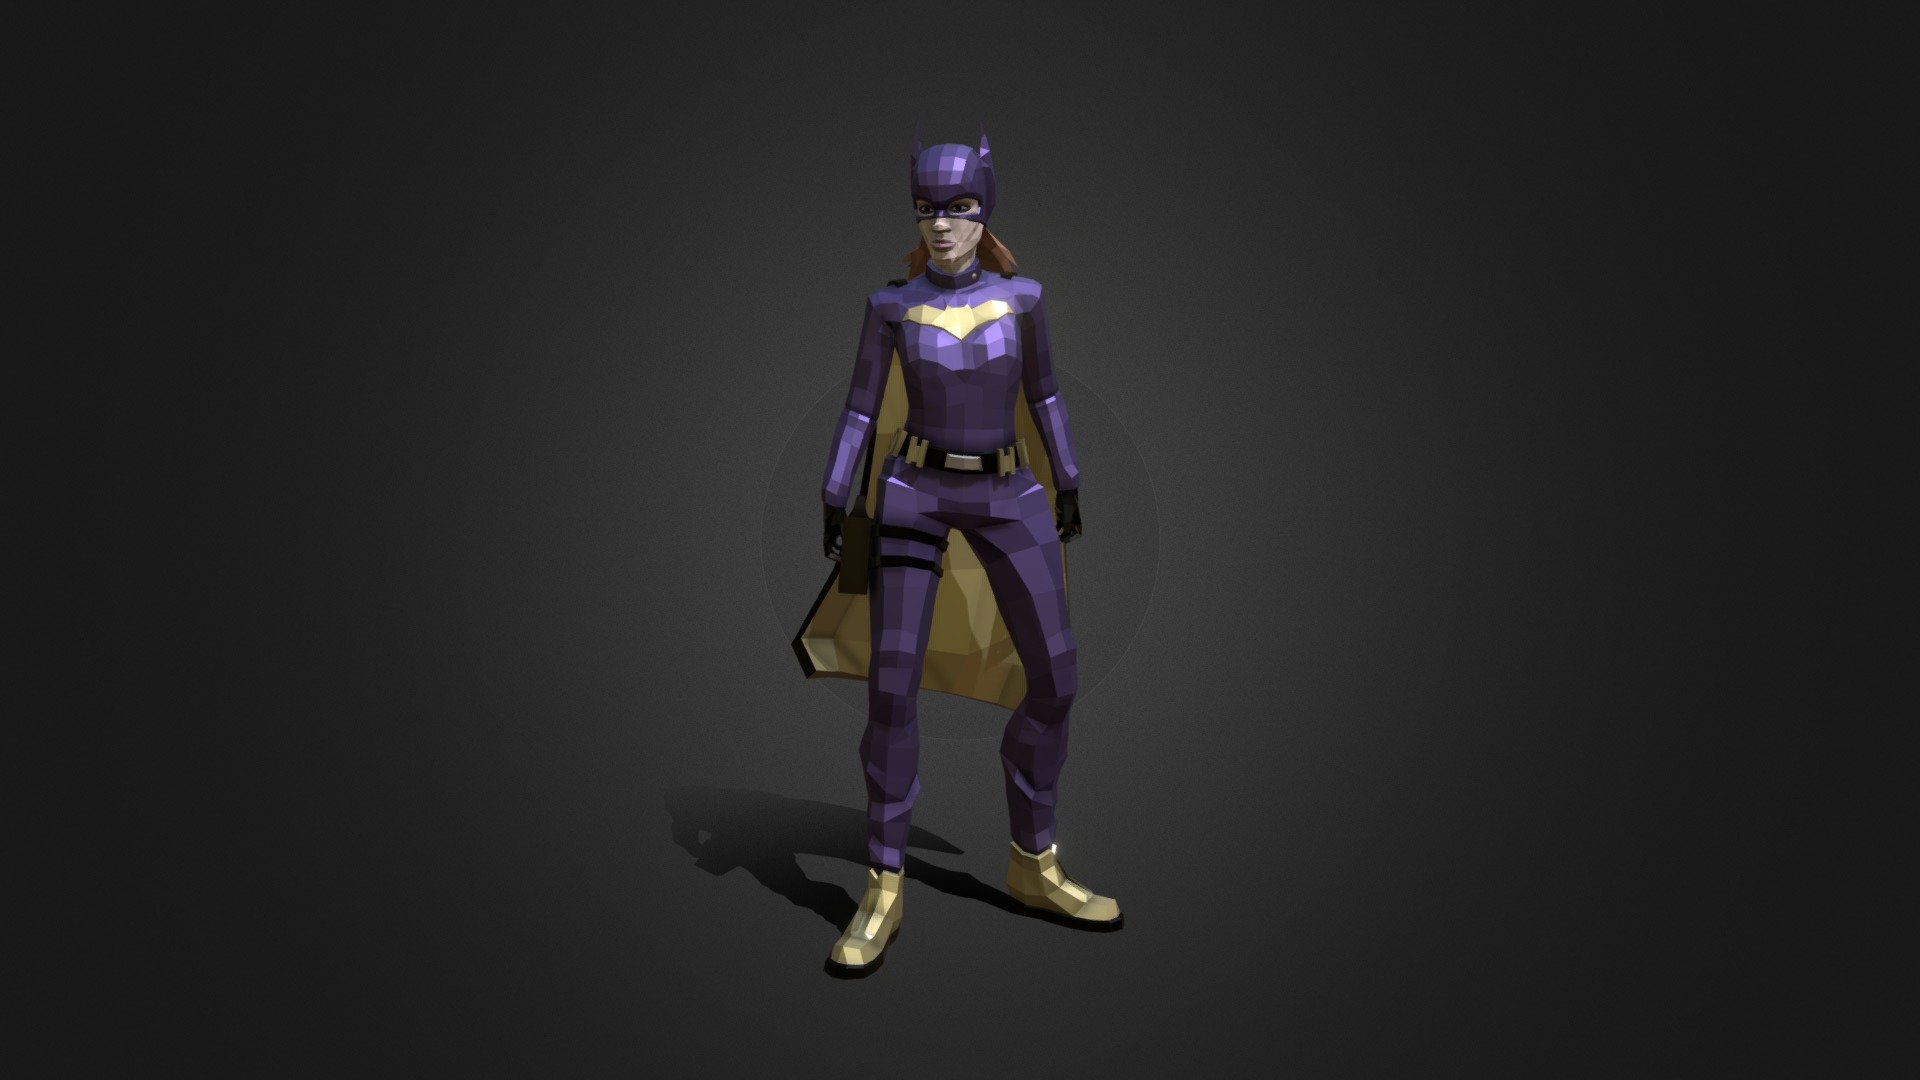 Batgirl, as portrayed by Leslie Grace for the canceled movie, Batgirl. This is my 155th DC Extended Universe character (and not my first non-canon DCEU character, following John Stewart and Wonder Woman &ldquo;1854